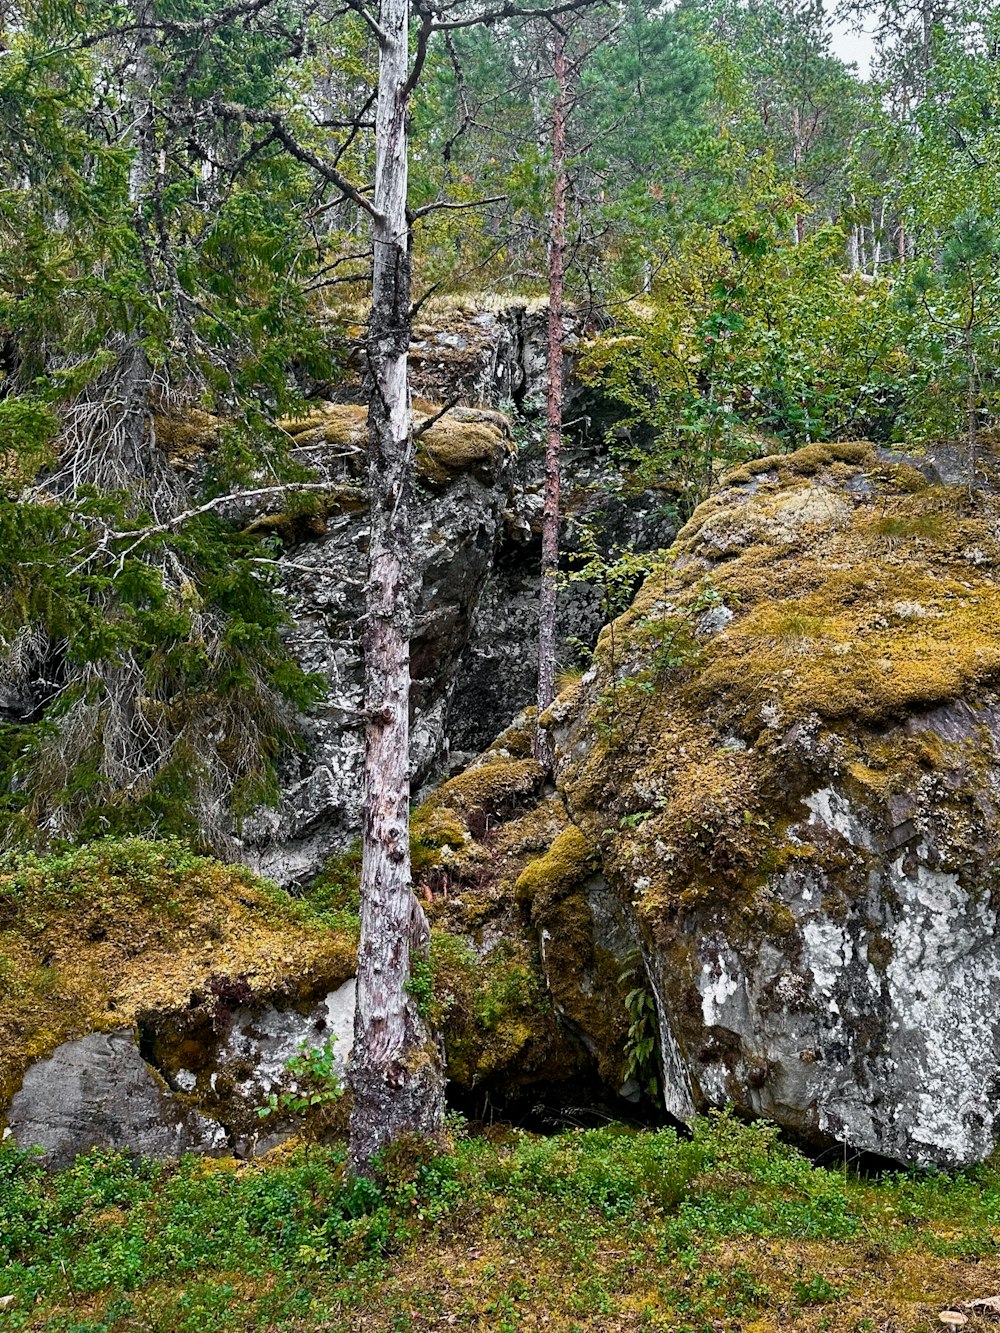 a couple of large rocks in the middle of a forest